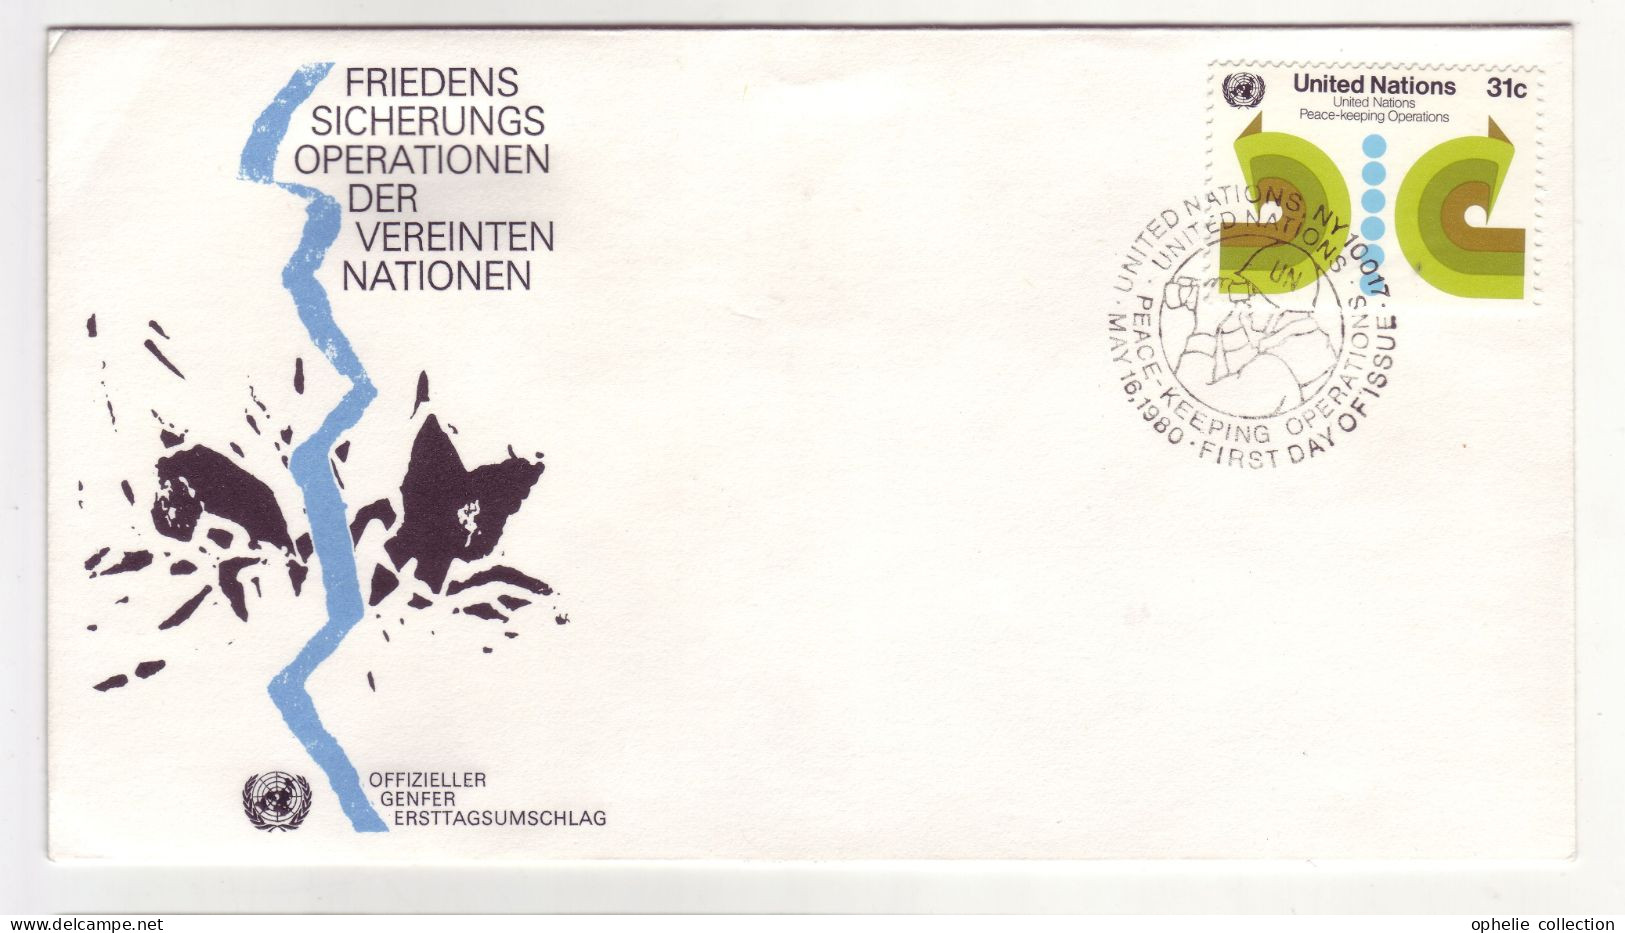 Nations Unies - Vienne FDC - 16/05/1980 - Peace Keeping Operations - M324 - Usati